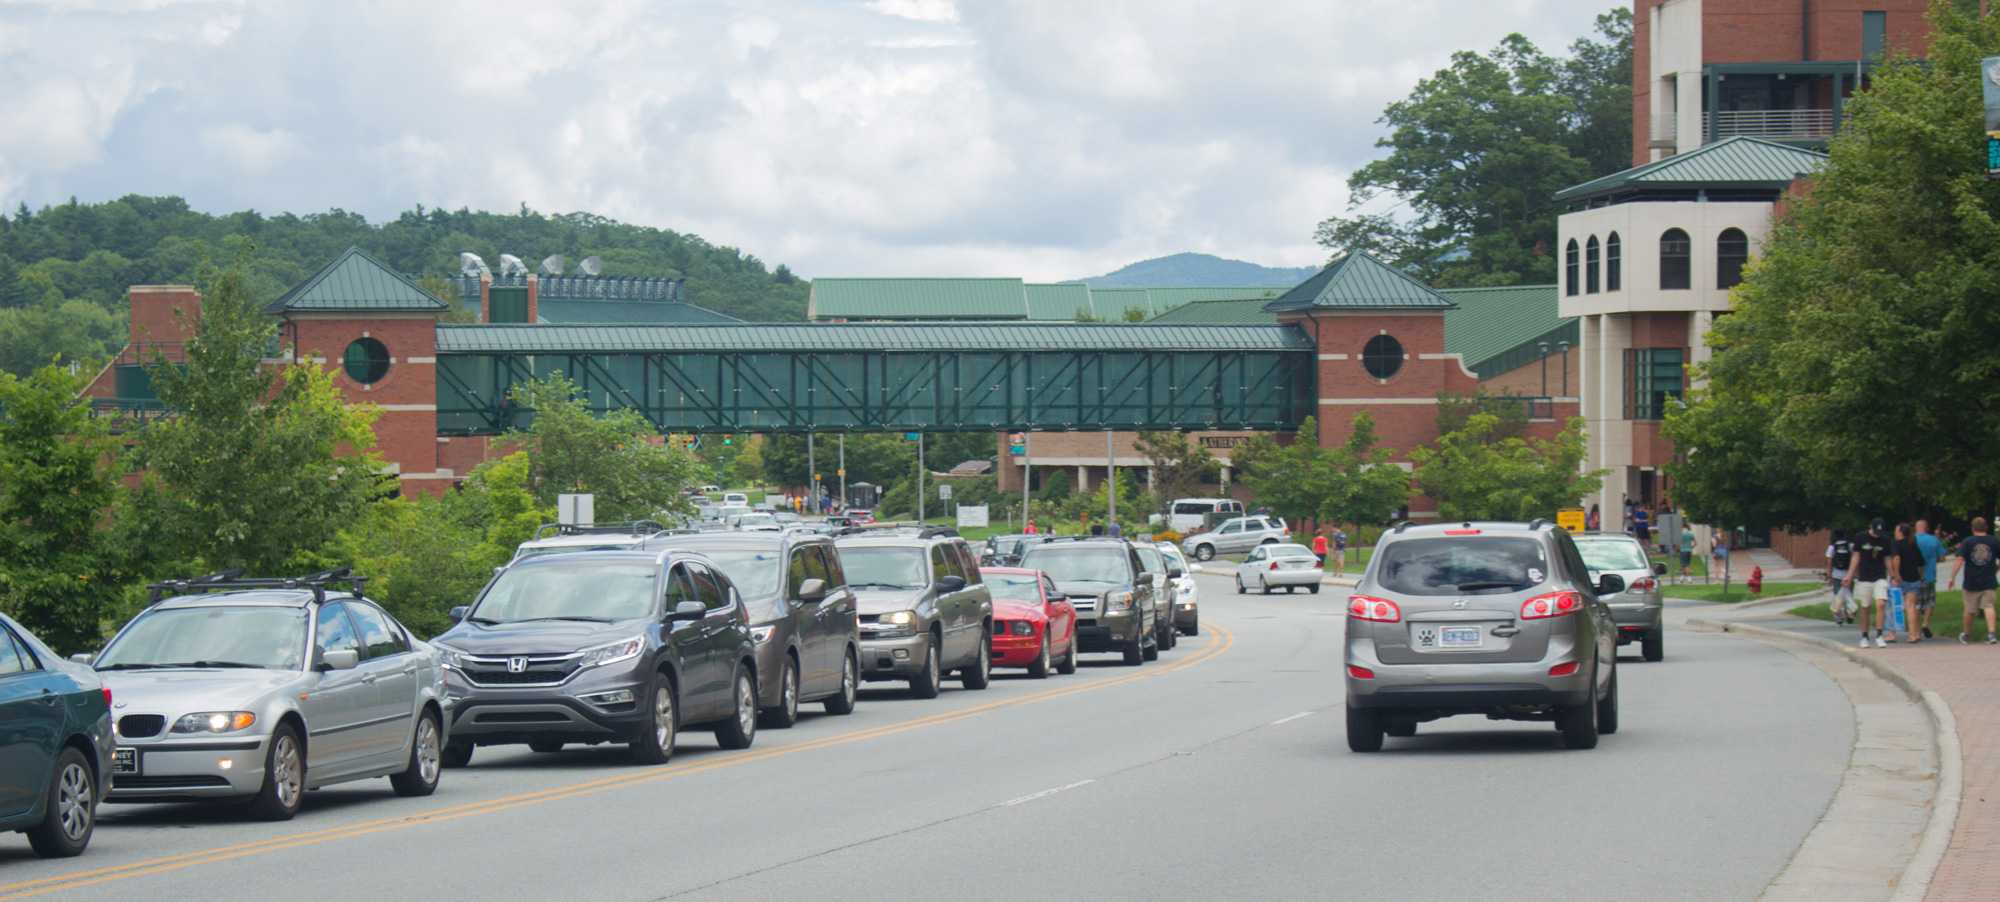 Heavy traffic persists throughout Boone all day Friday as students move into town. Photo by Aaron Moran